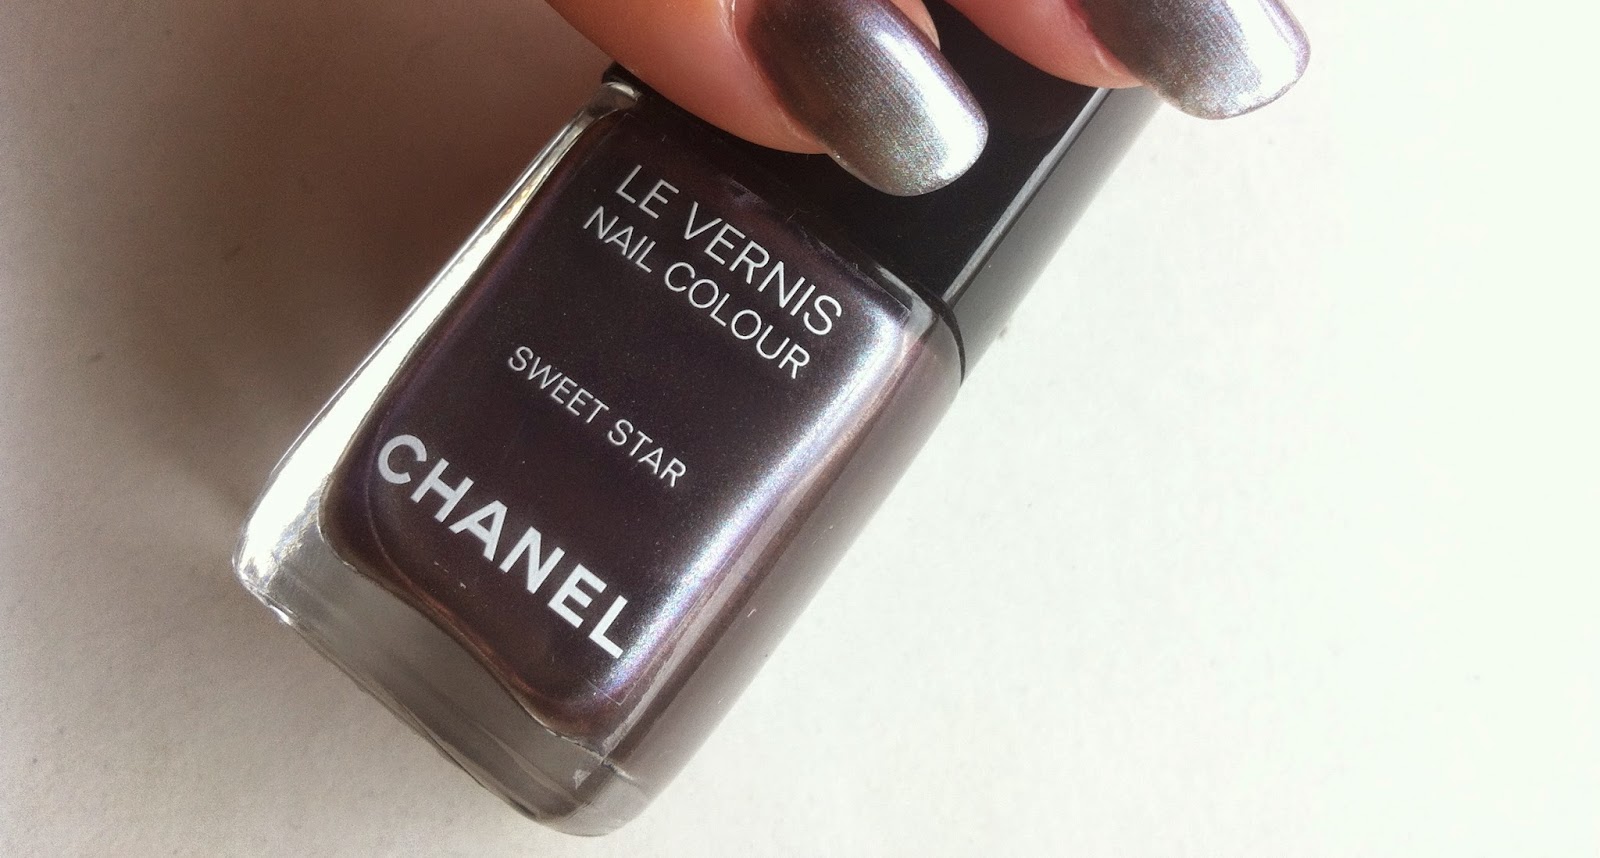 chanel vogue fashion night 2014, vfno 2014 chanel, le vernis sweet star, le crayon yeux sweet star, berry lucky, cocorange, chanel vfno 2014 swatches